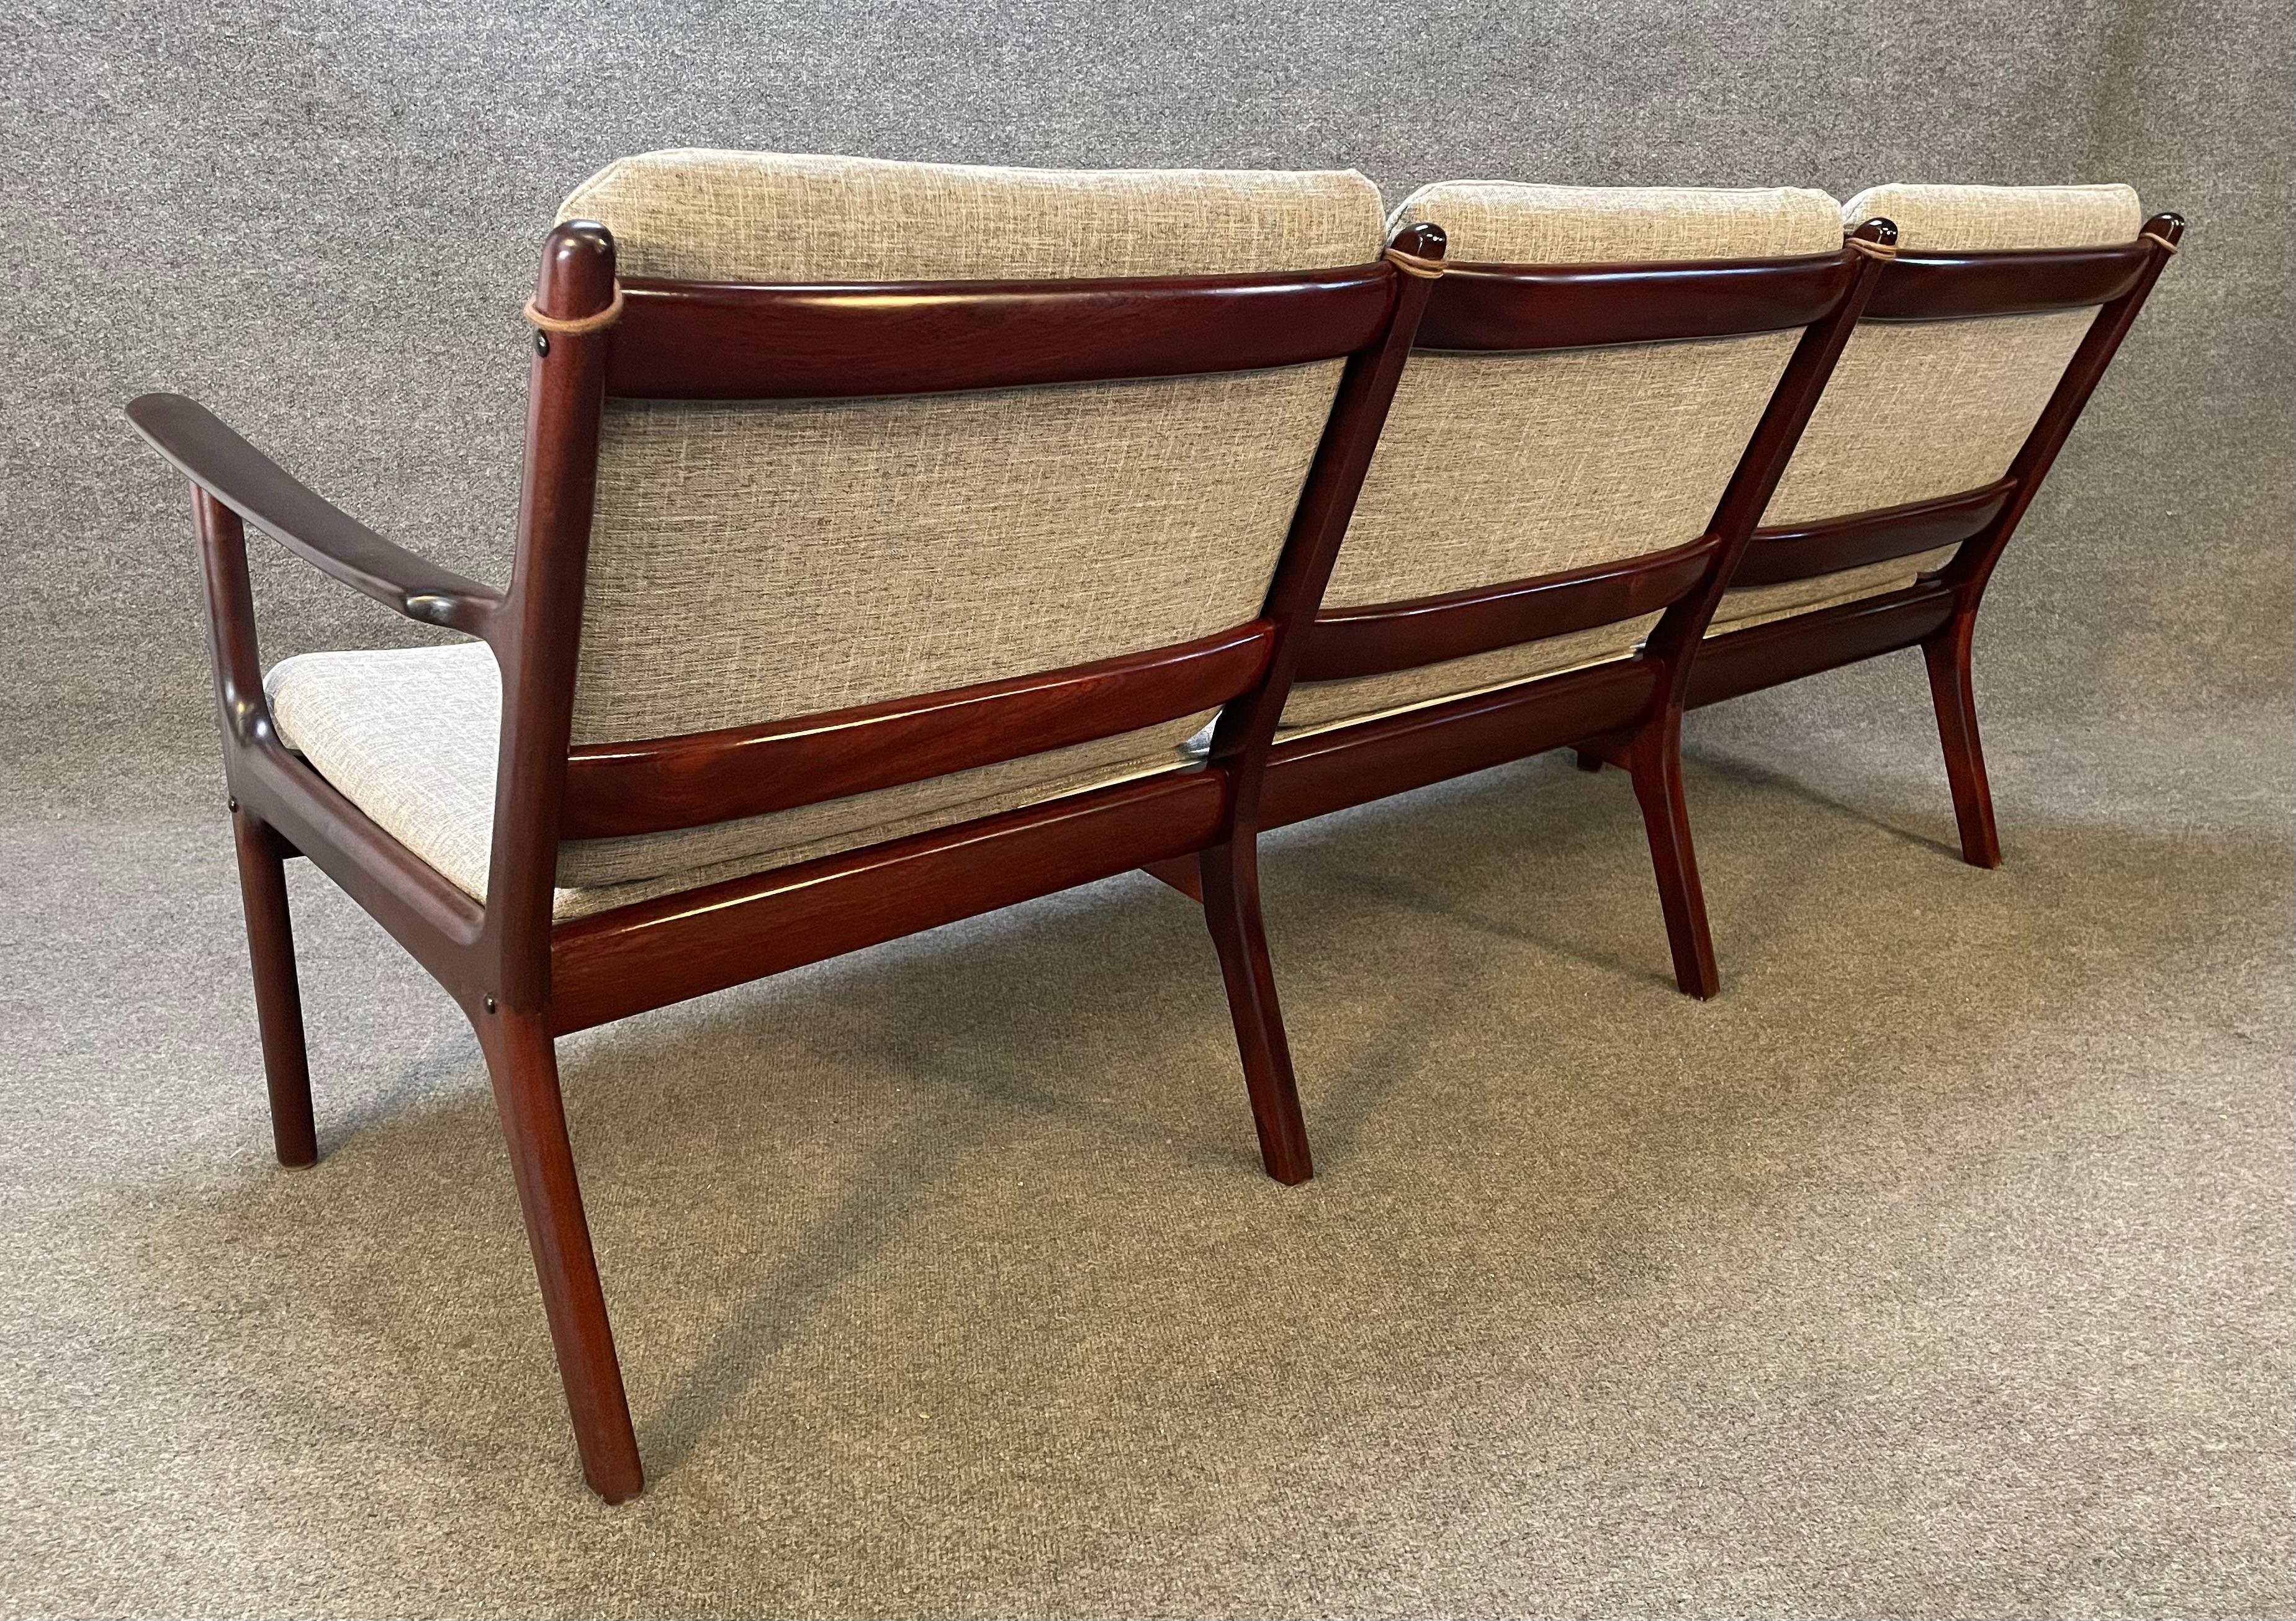 Vintage Danish Mid Century Mahogany Sofa by Ole Wanscher for Poul Jeppesen For Sale 2